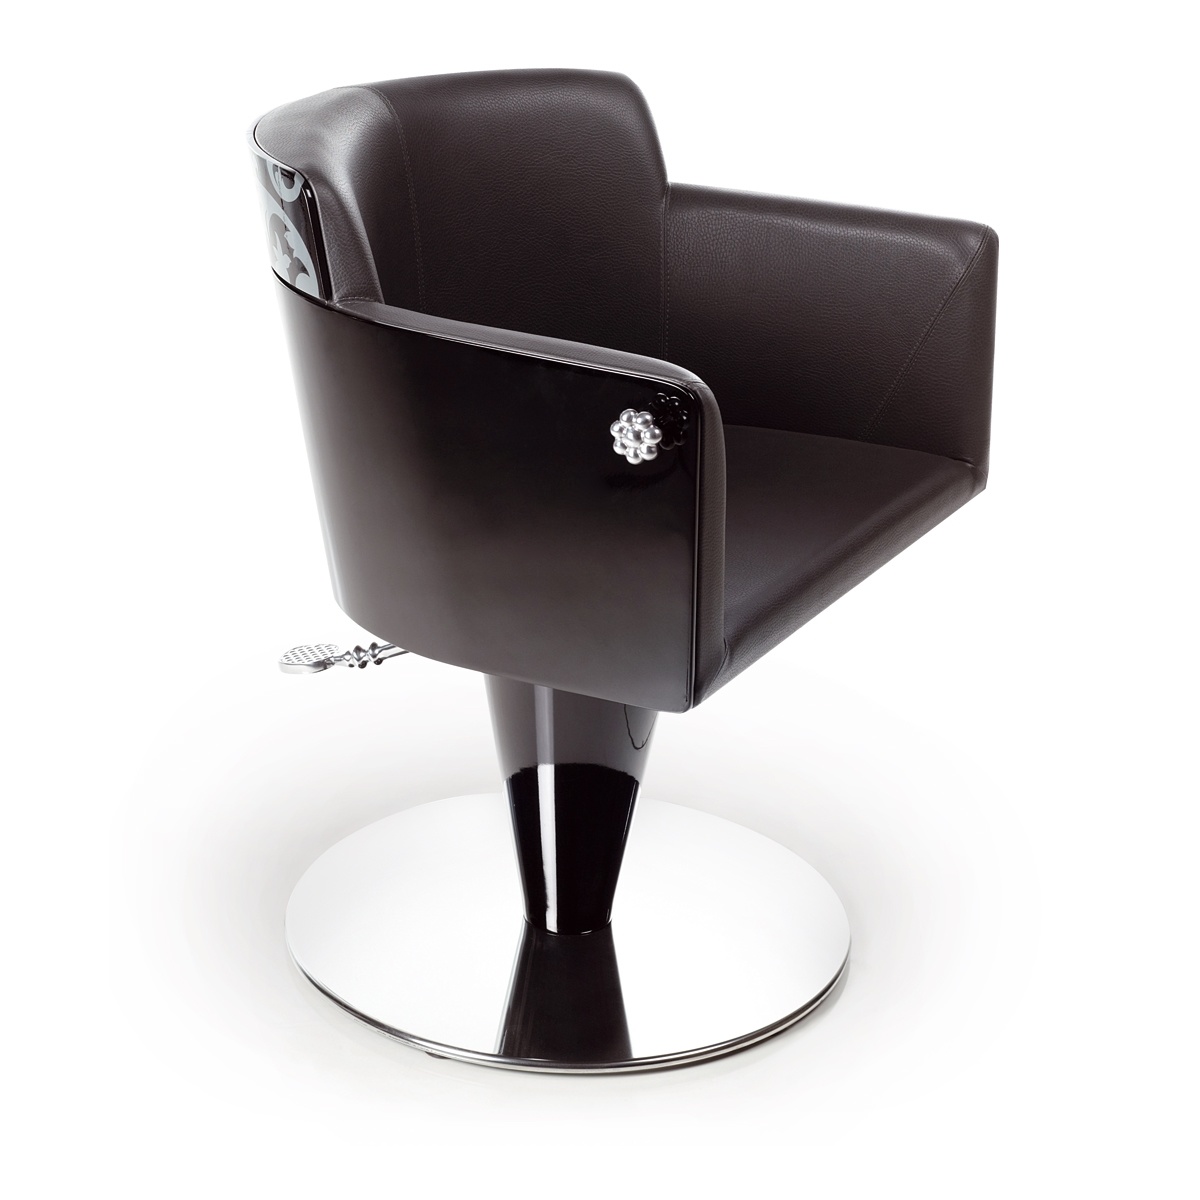 Unique Styling Chair Modern Design Salon Barber Styling Chair